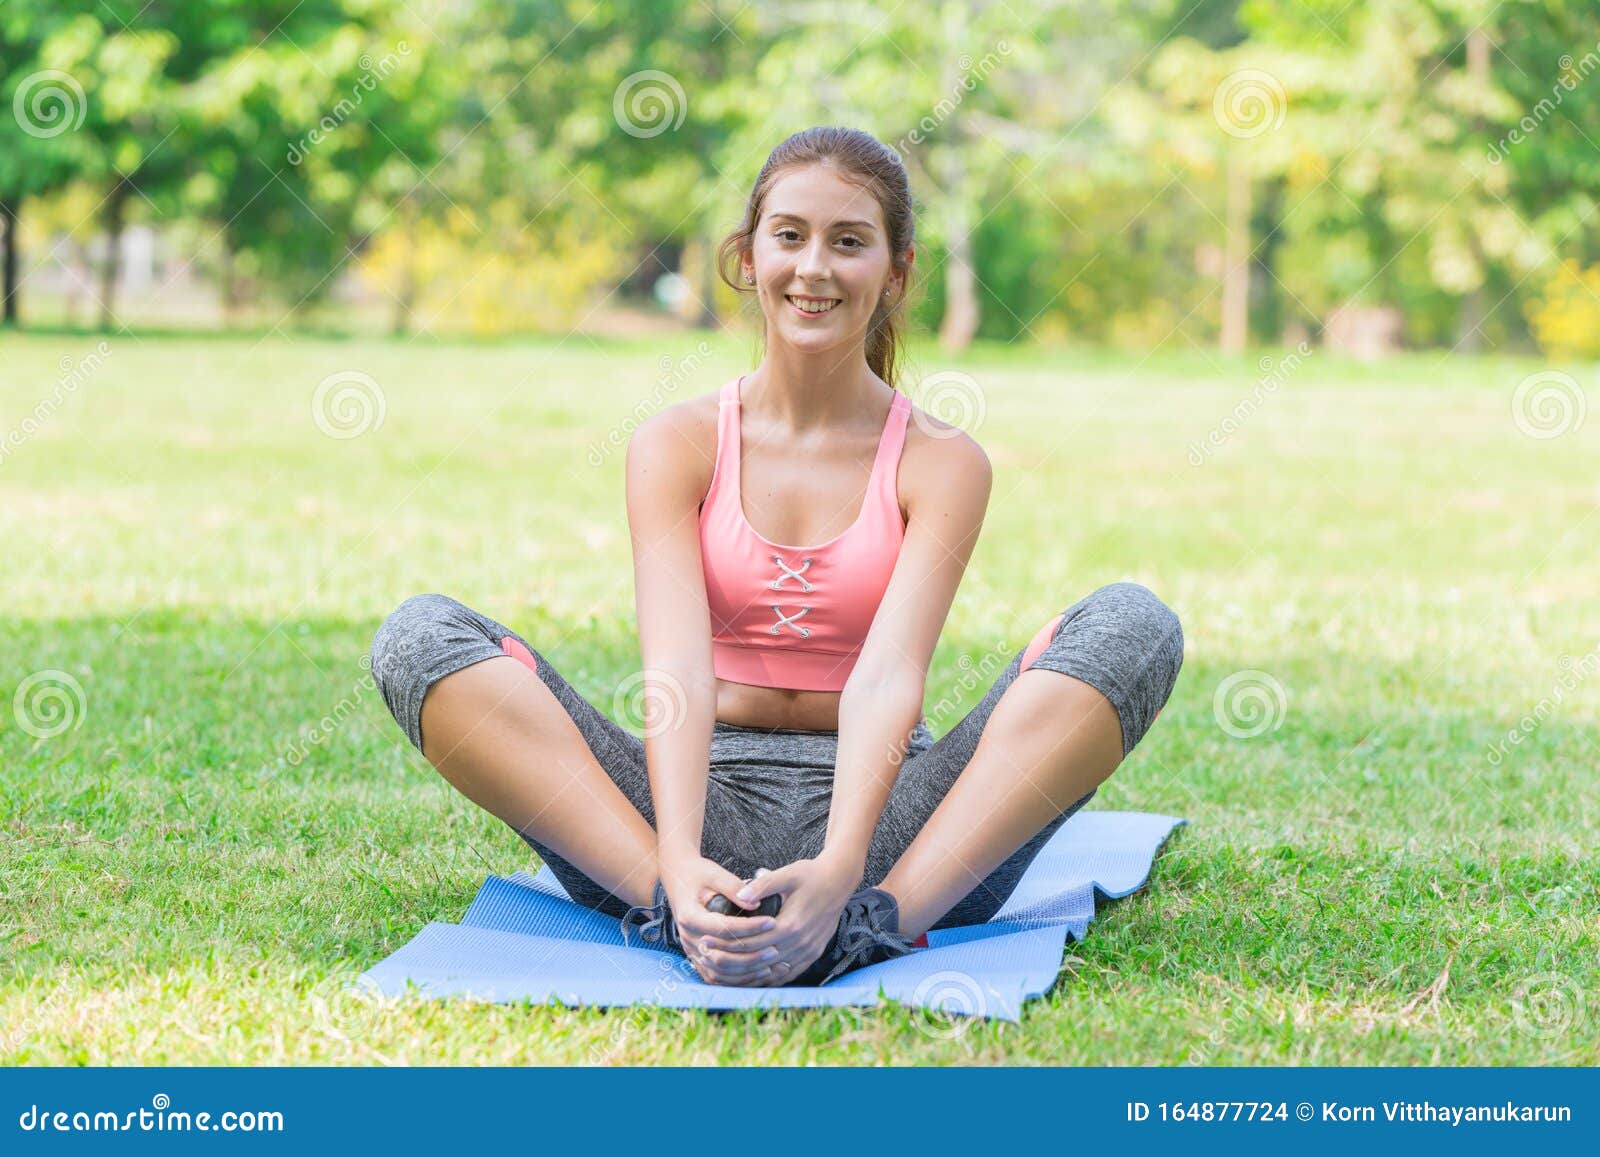 Cute Young Healthy Sport Teen Sitting Smiling on Yoga Mat Outdoor Park  Garden Stock Photo - Image of outdoor, recreation: 164877724